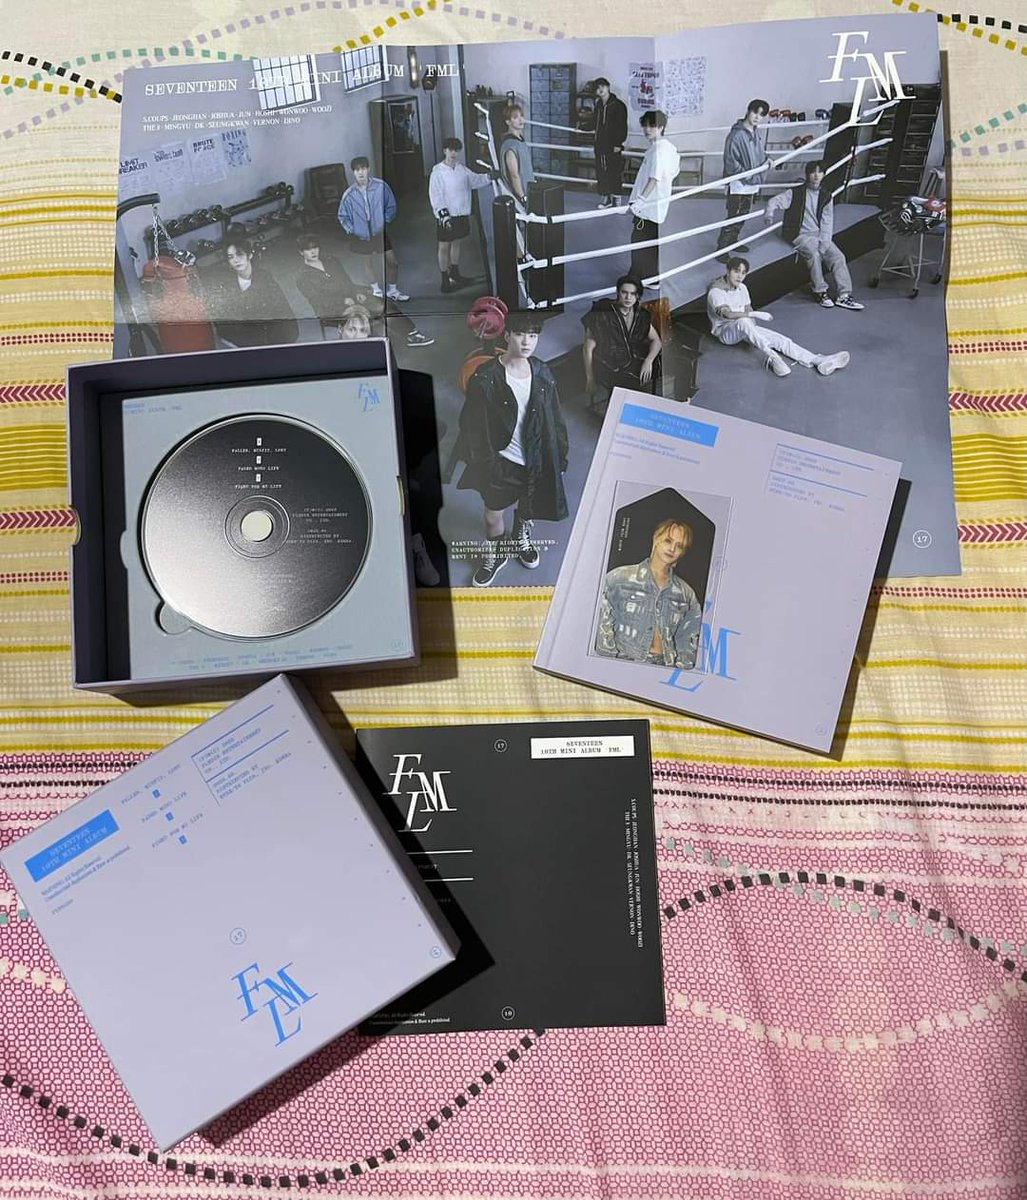 Semi quitting giveaway! GA!
🩷1 winner of unsealed fml deluxe
🩷1 winner of 100 pesos gcash

MECHANICS:
- like & rt both this post and the thread of bentables below. -Comment picture of your bias🫰
- Ends once set is sold
- ❌ IMPATIENT
- winner must be willing to shoulder sf